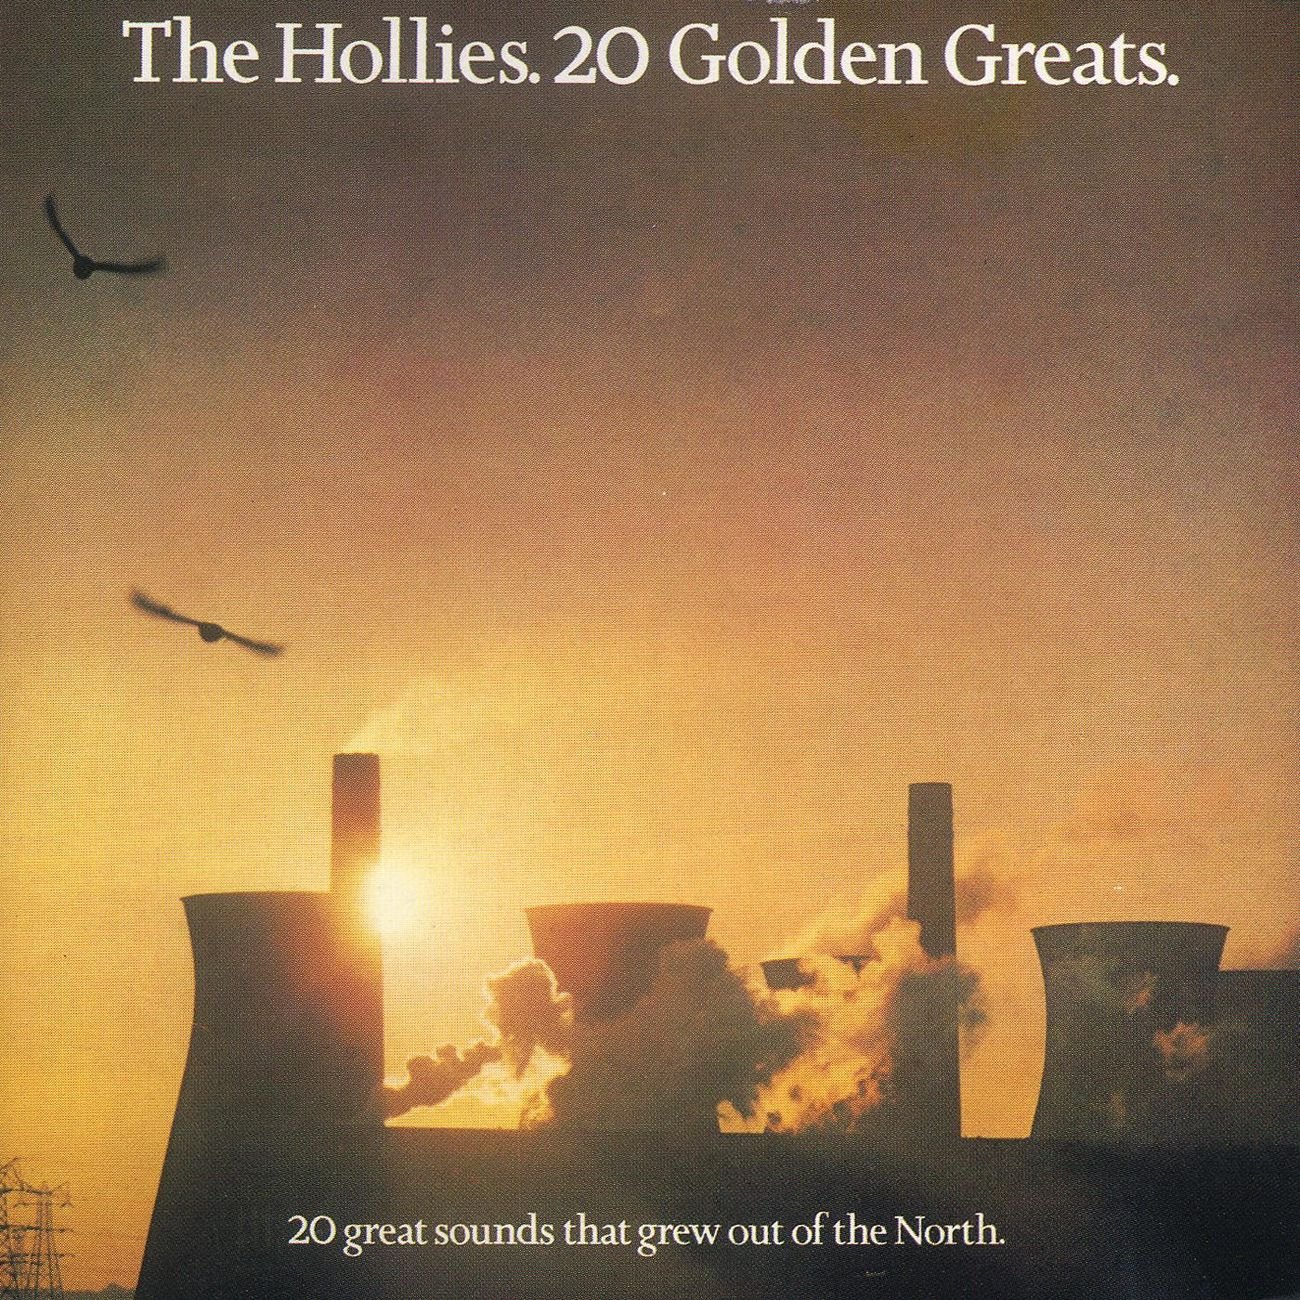 The Hollies-20 Golden Greats-REMASTERED-CD-FLAC-1987-LoKET